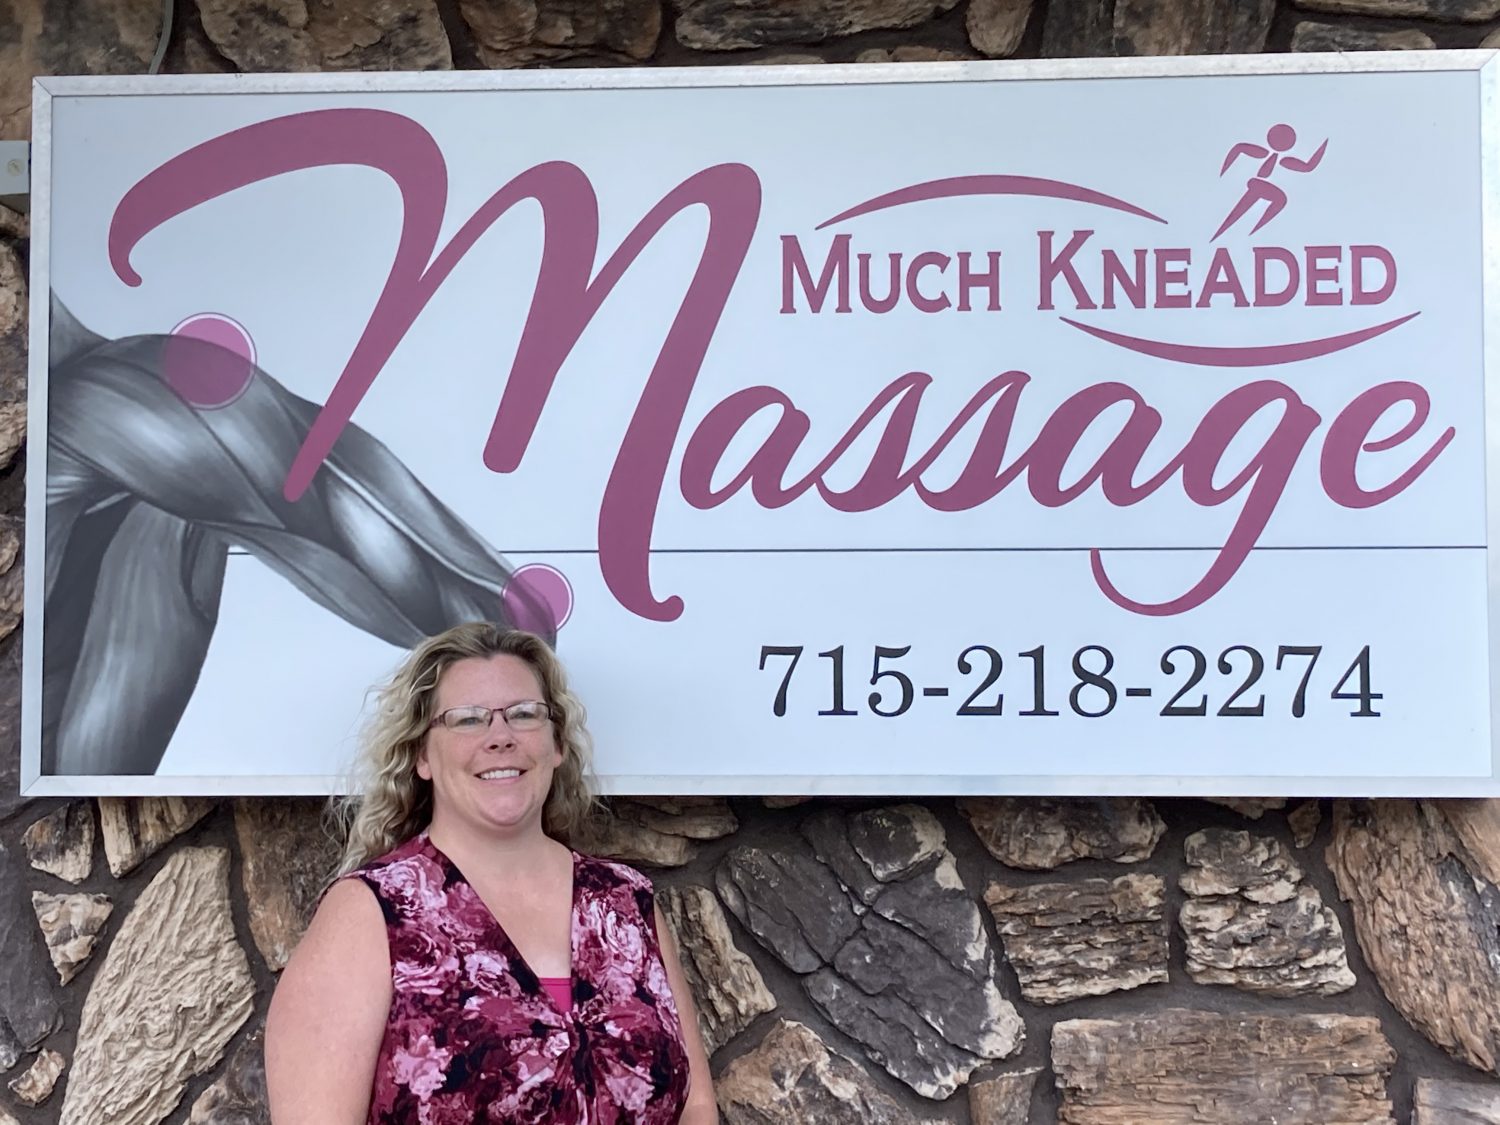 Much Kneaded Massage settles into new home